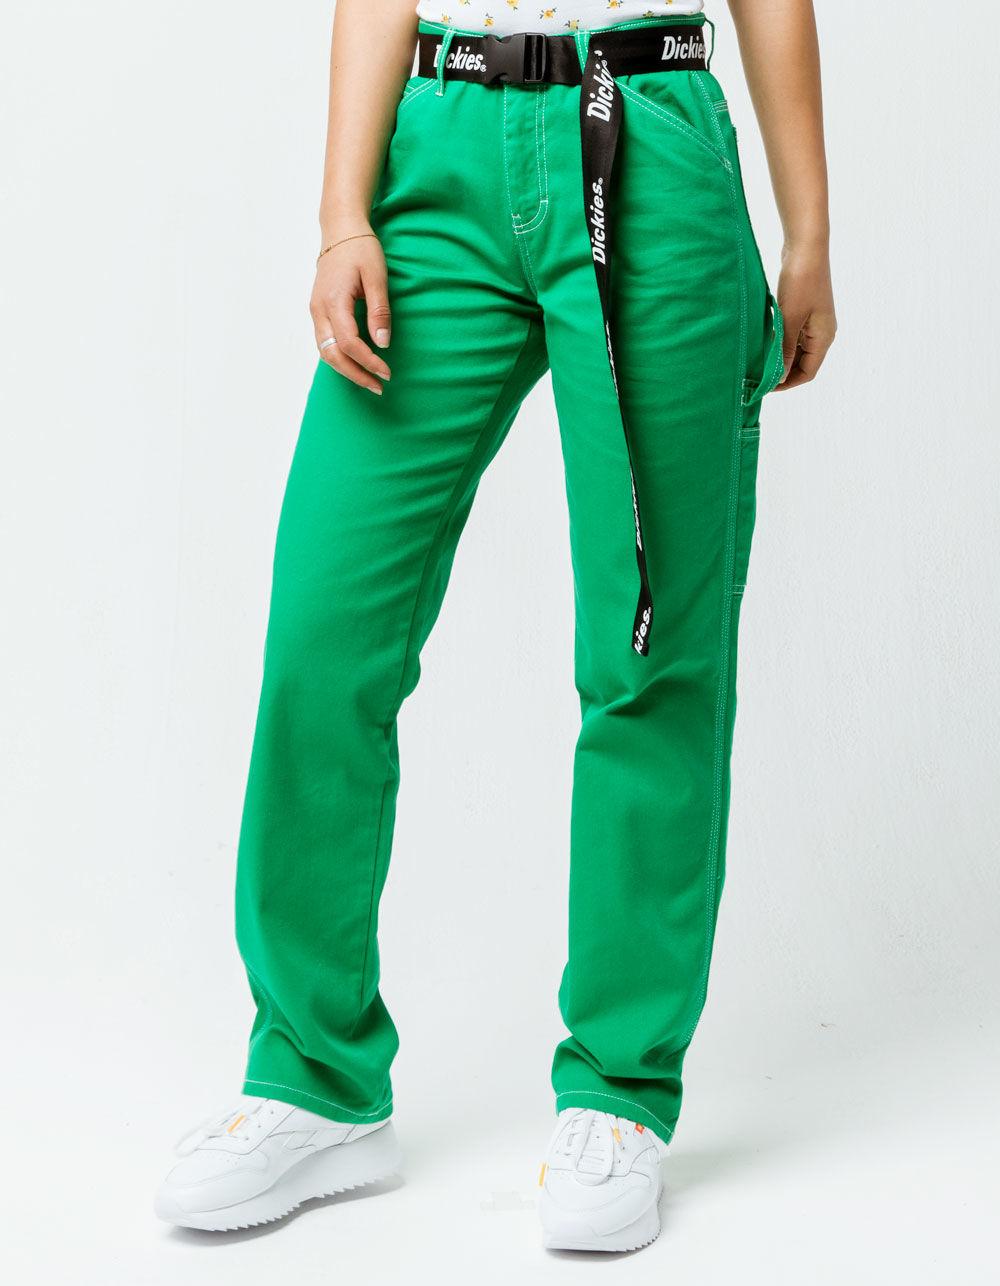 Lyst - Dickies Belted Green Carpenter Pants in Green